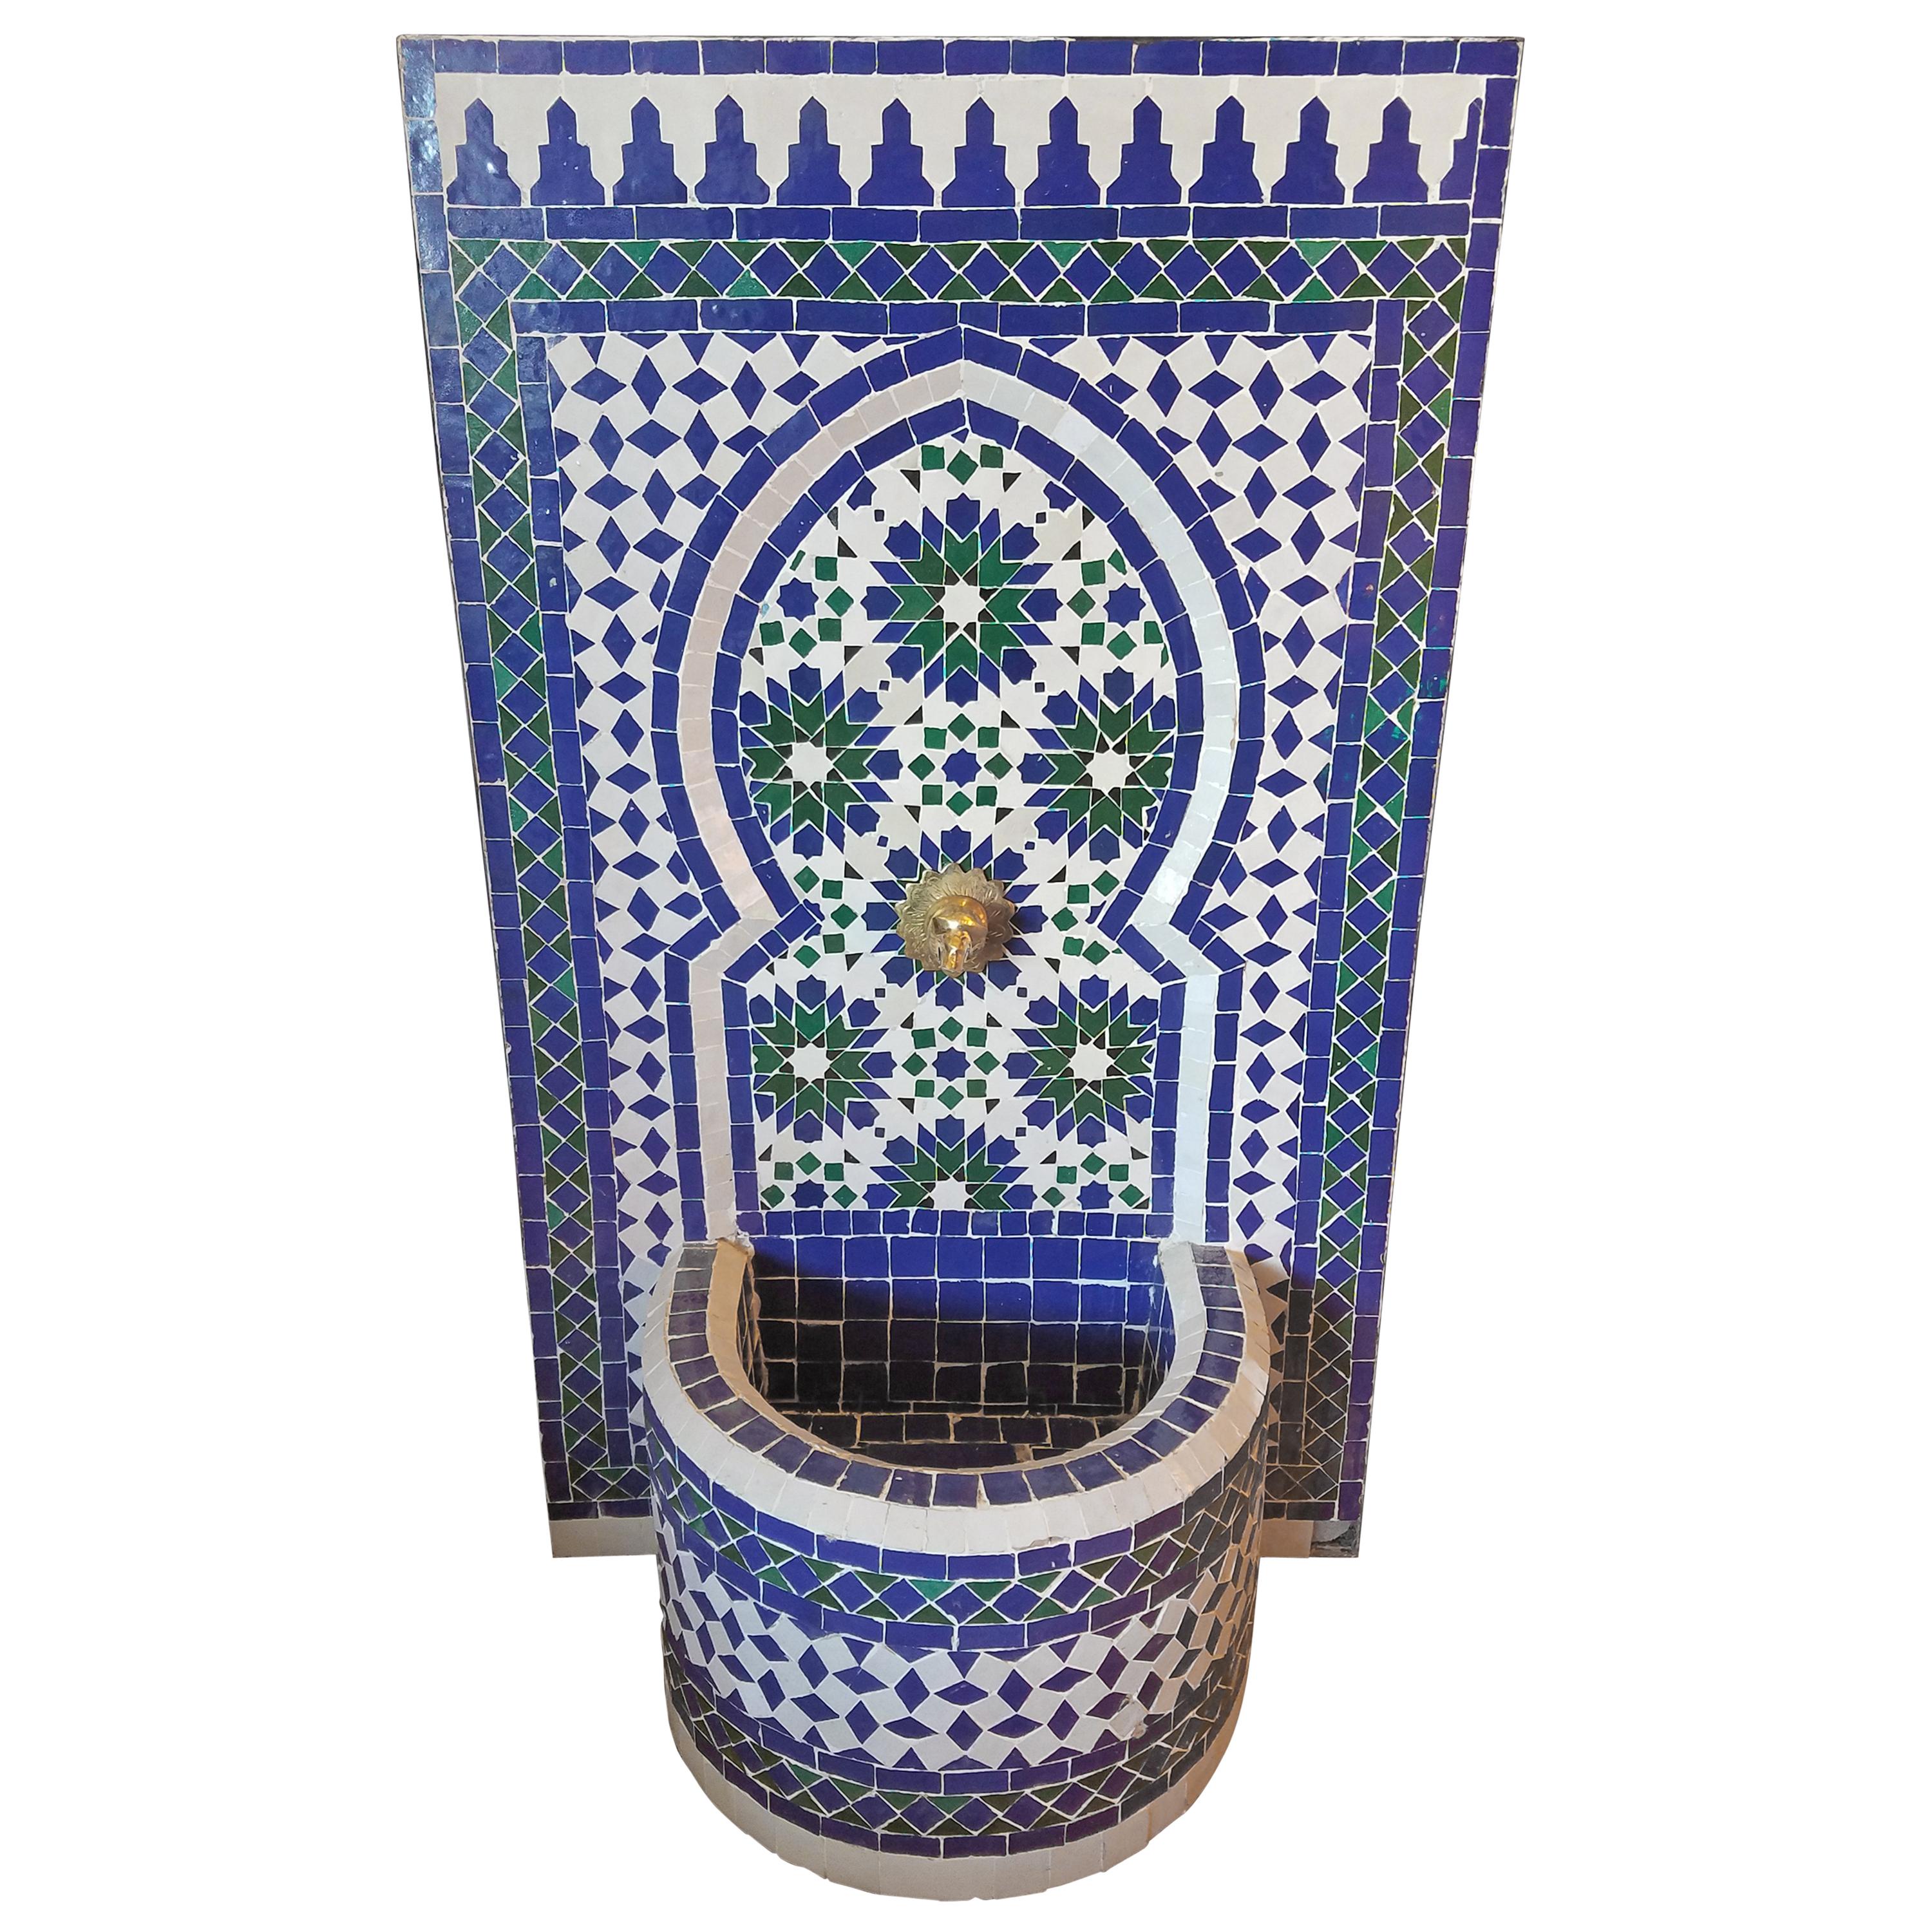 Blue/White/Green Moroccan Mosaic Tile Fountain For Sale